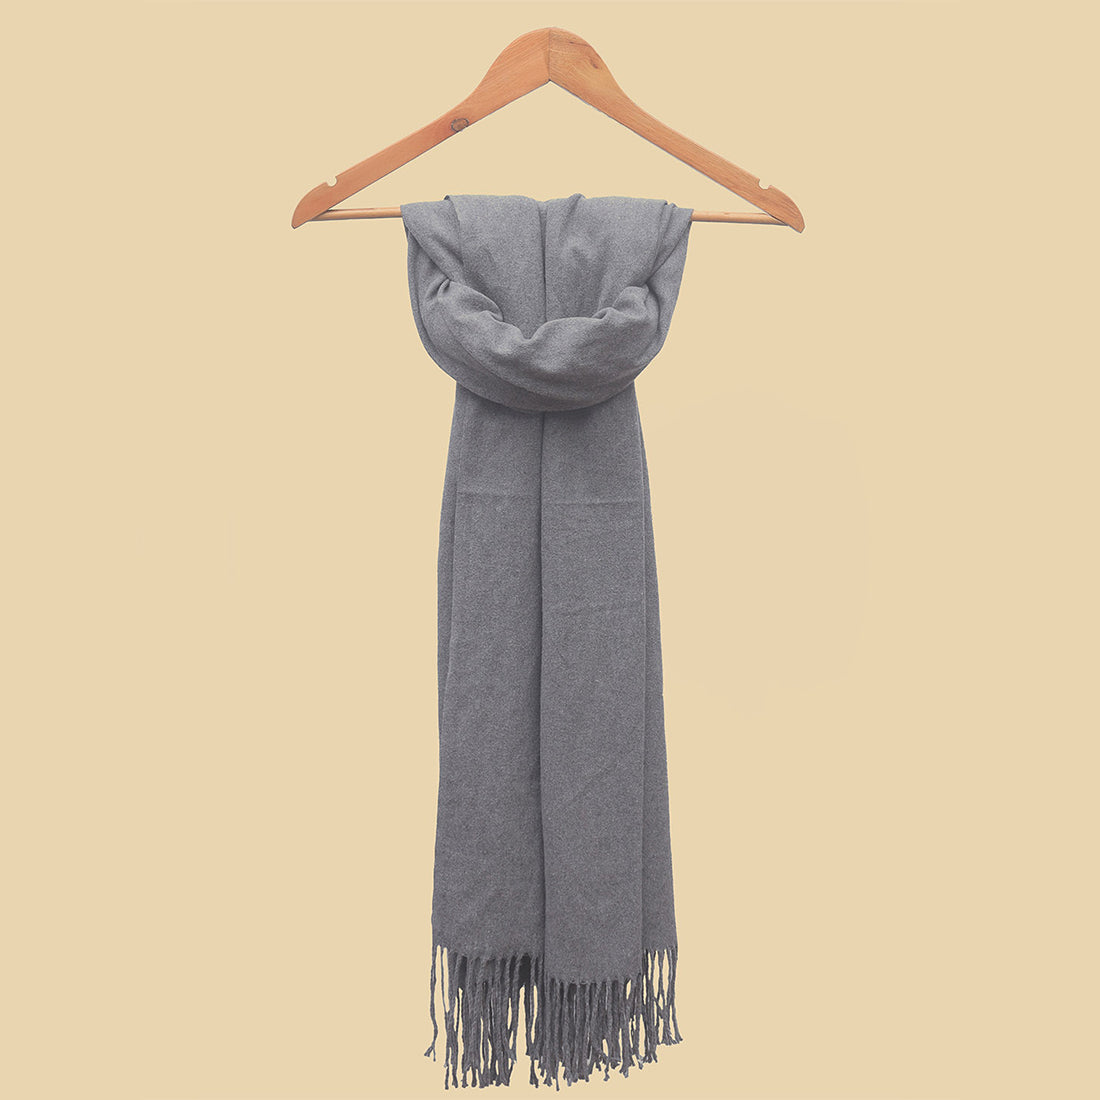 Ayesha Grey Acrylic Winter Scarf with Long Fringes - Special Cashmere-Like Feel